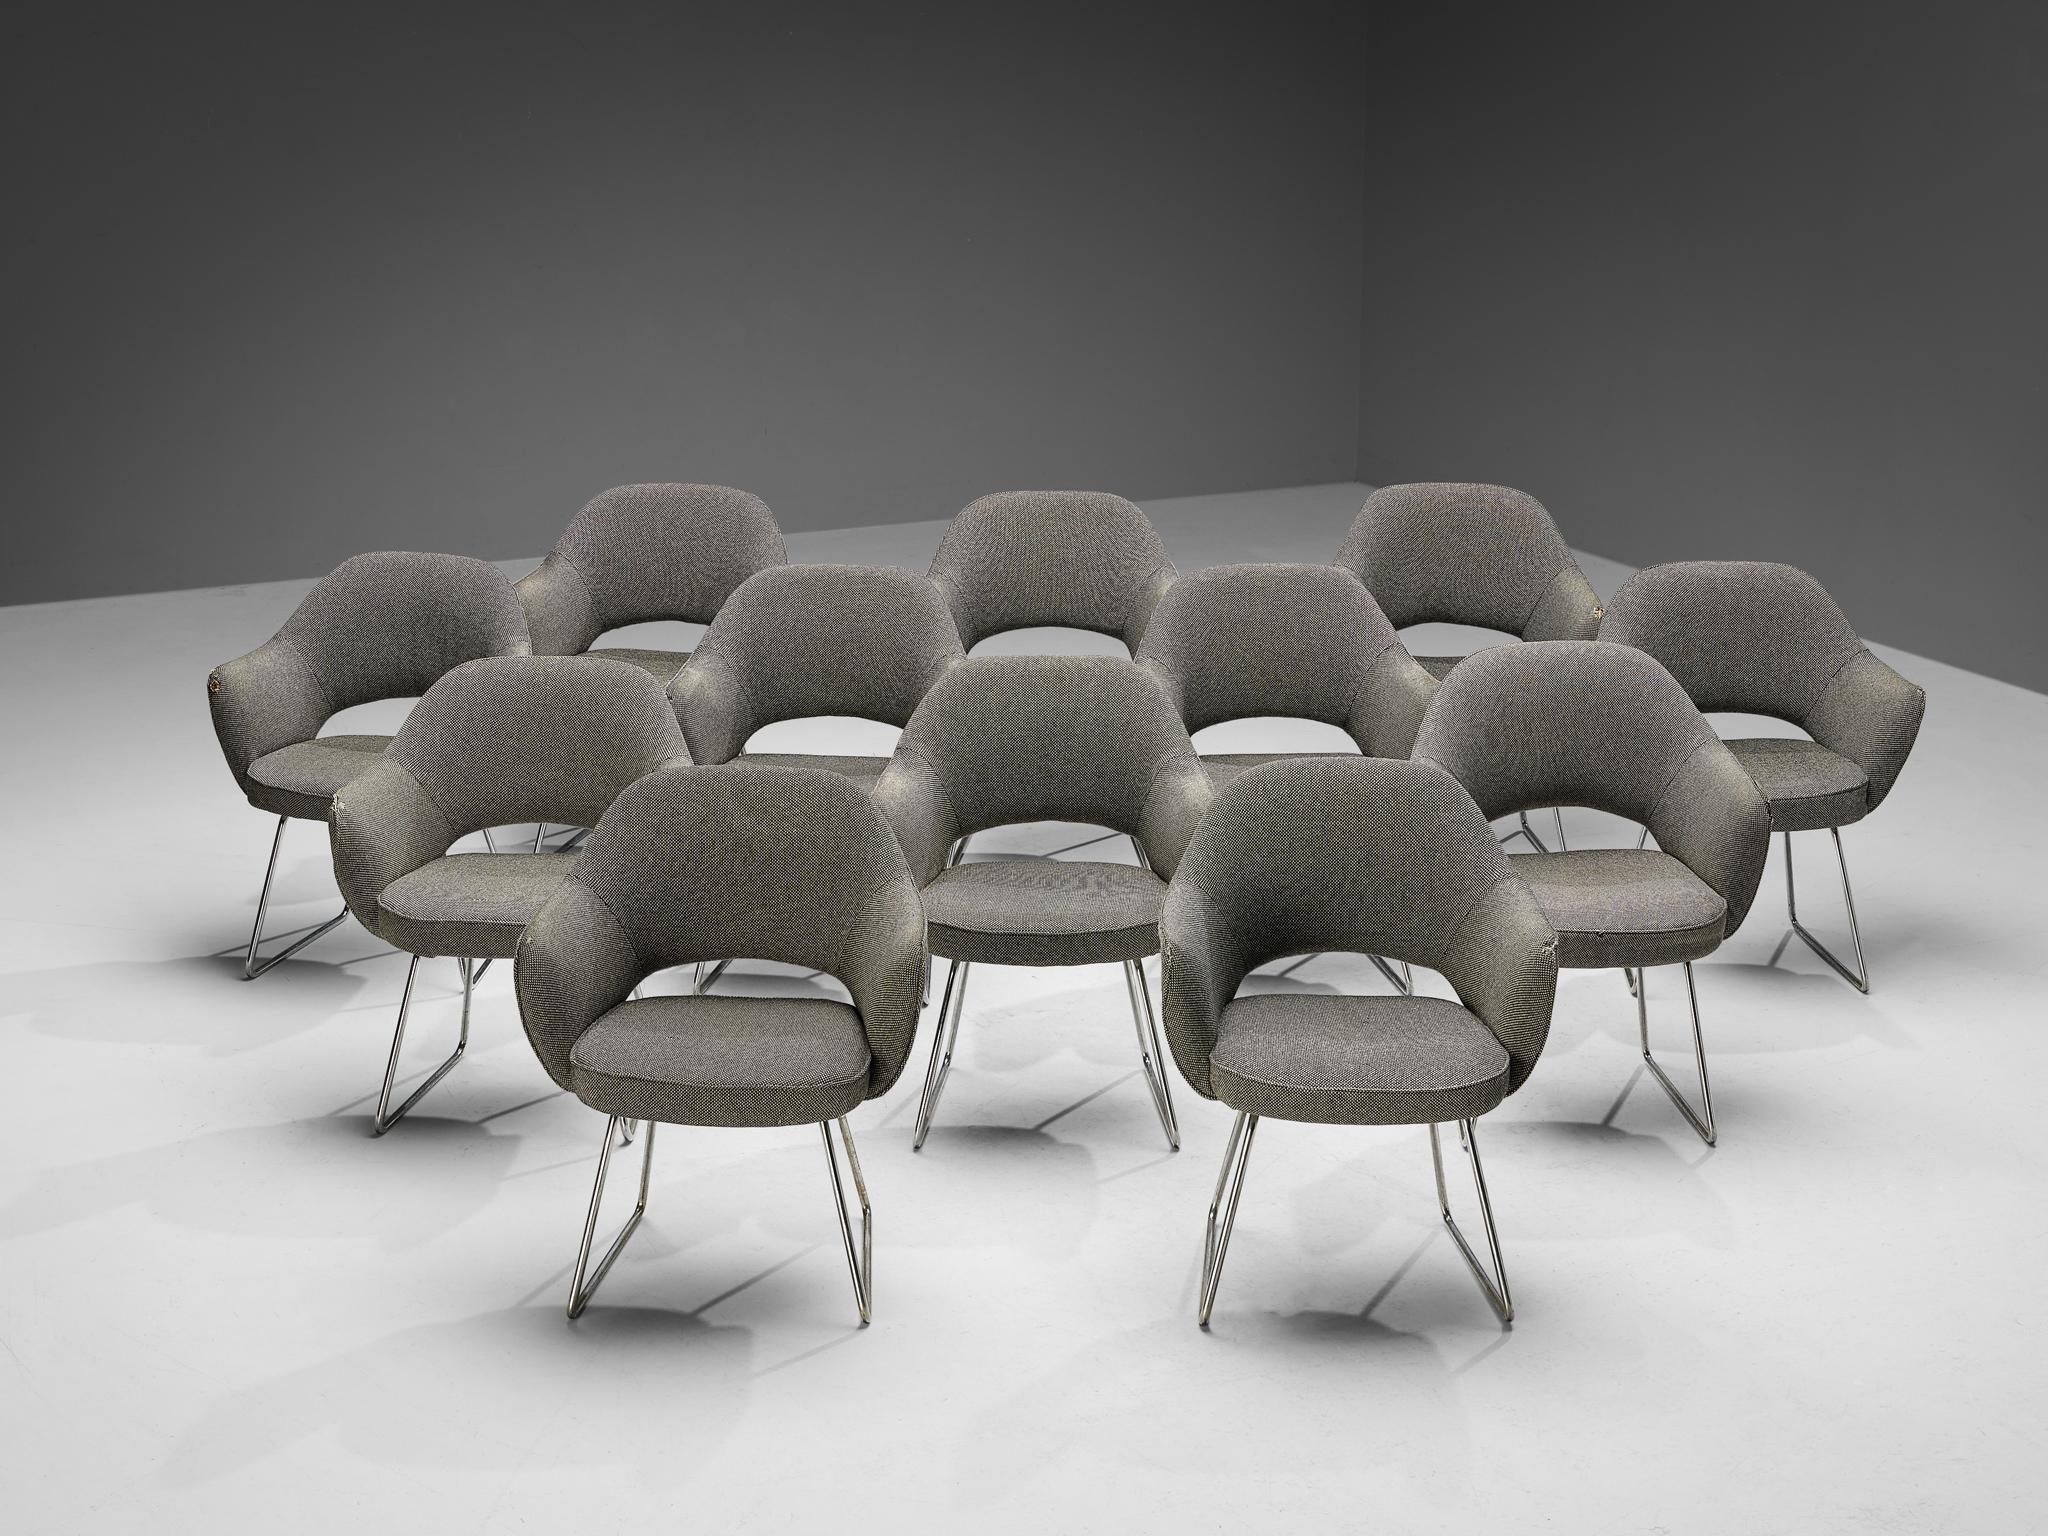 Eero Saarinen for Knoll International, set of twelve ‘Conference’ armchairs, original fabric, chromed metal, France, Paris, designed in 1957

This large set of armchairs were commissioned by the UNESCO Headquarters located in Paris. This iconic